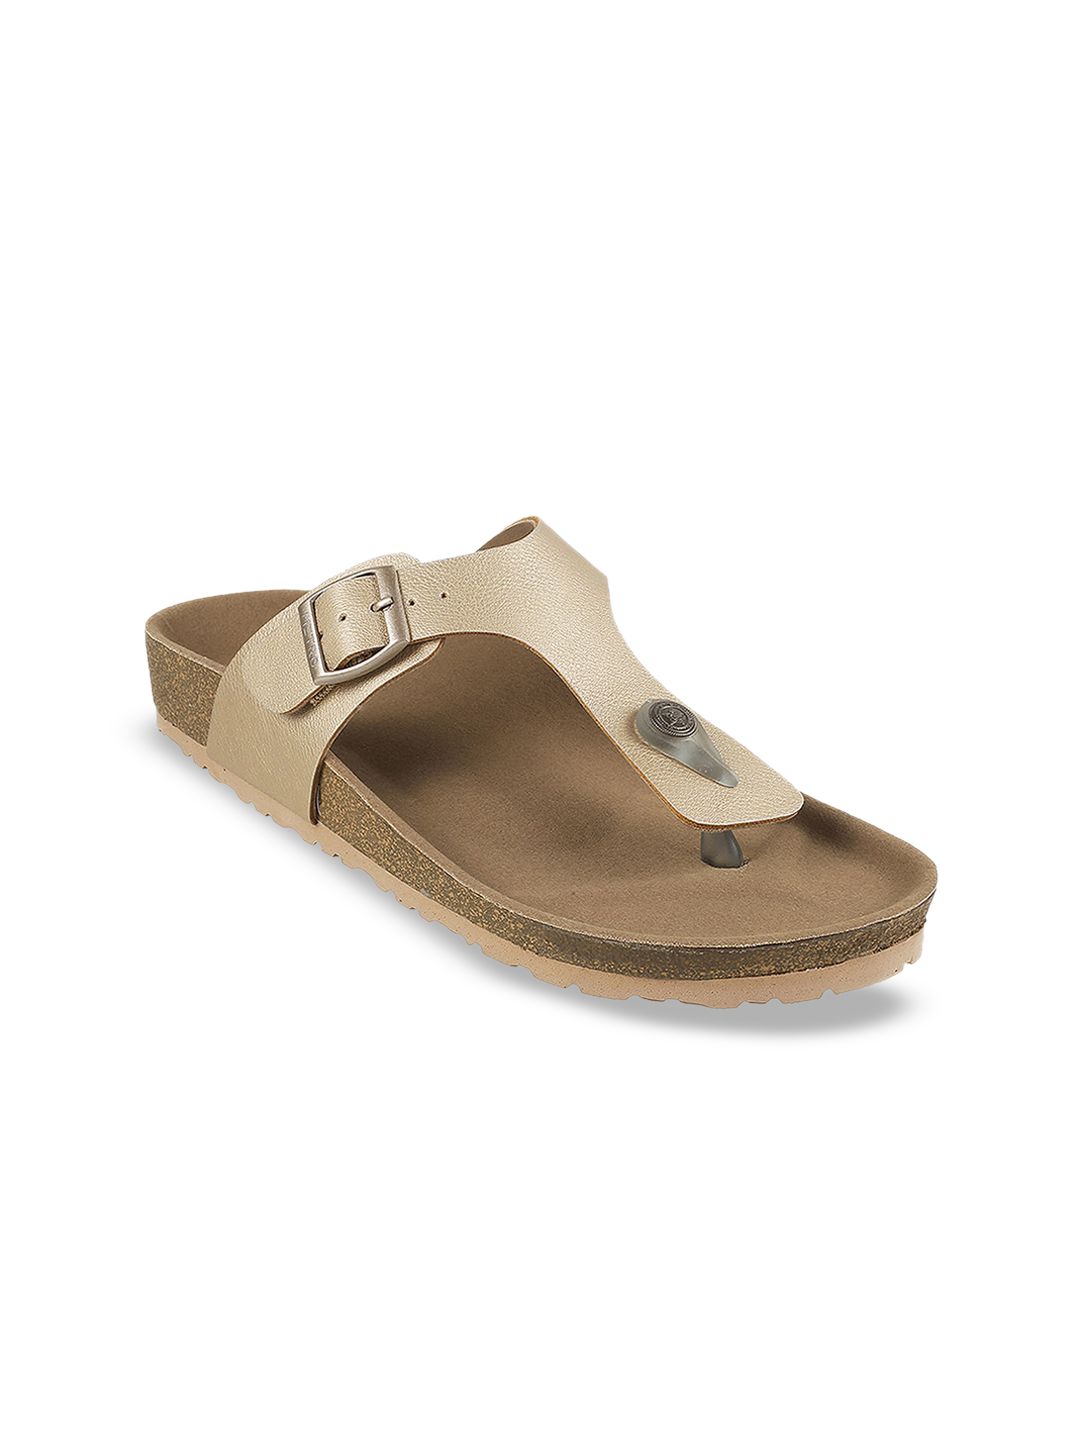 Metro Women T-Strap Flats with Buckles Price in India